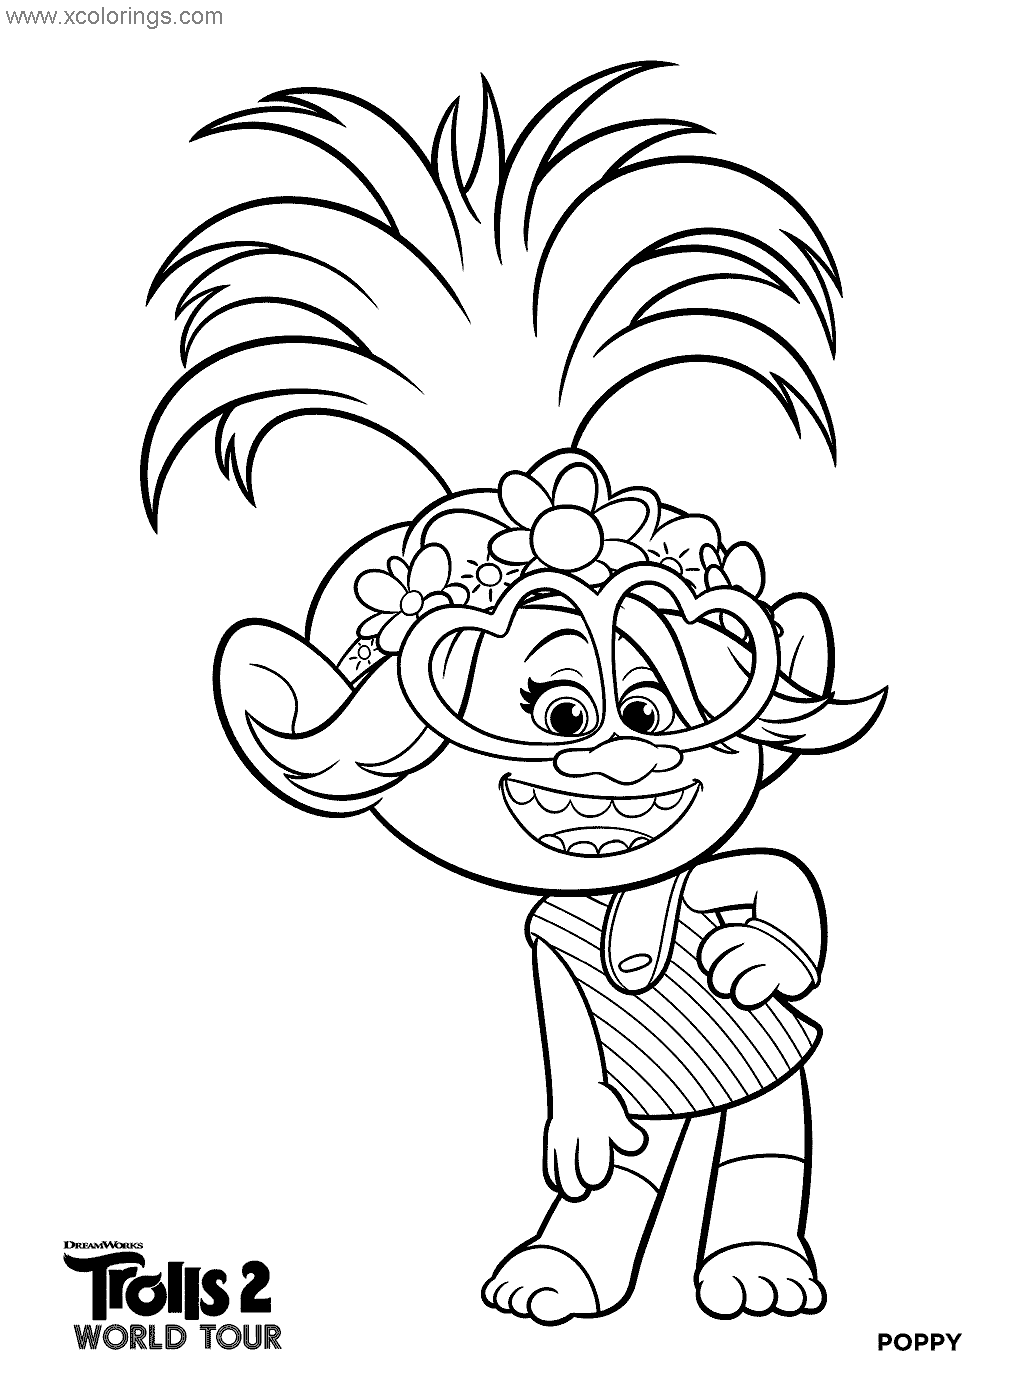 Free Queen Poppy form Trolls World Tour Coloring Pages printable